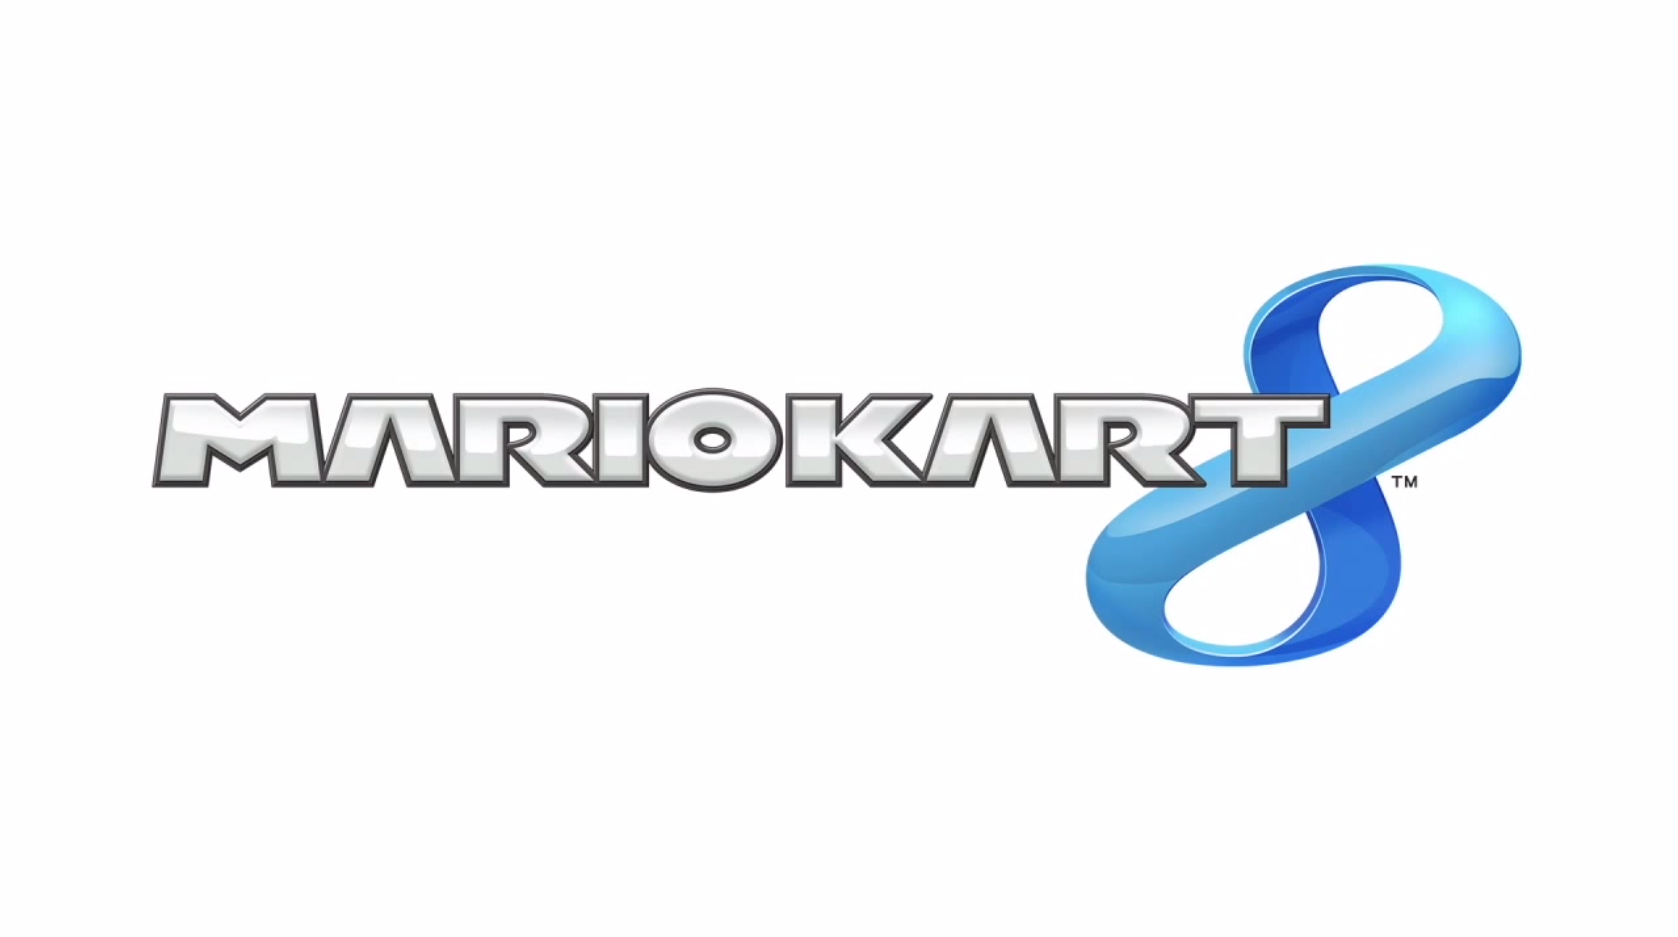 New Mario Kart 8 Trailer and Spring 2014 Release Date